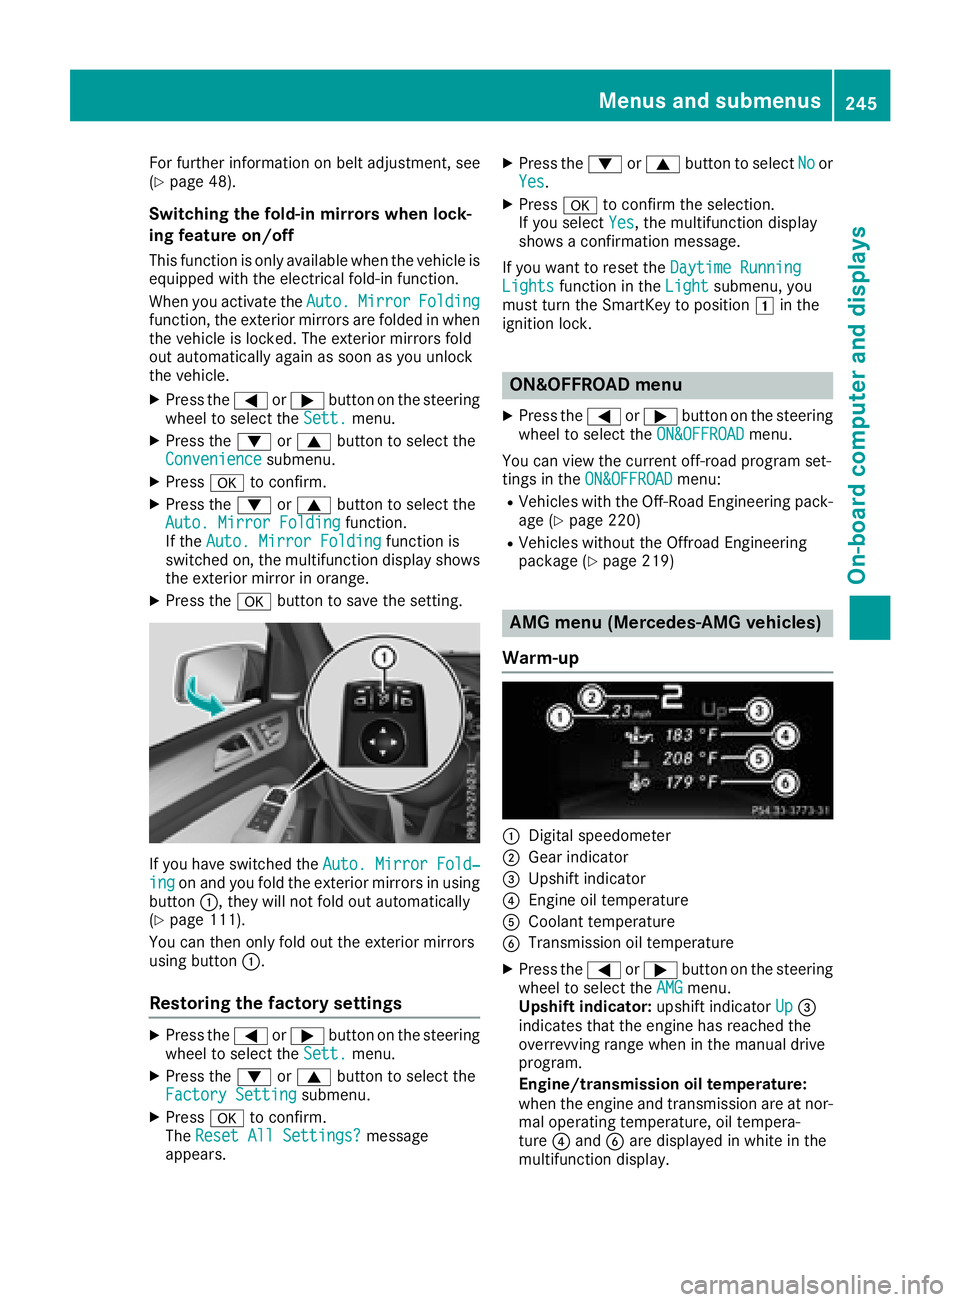 MERCEDES-BENZ GLS SUV 2018  Owners Manual For further information on belt adjustment, see
(Ypage 48).
Switching the fold-in mirrors when lock-
ing feature on/off
This function is only available when the vehicle is
equipped with the electrical